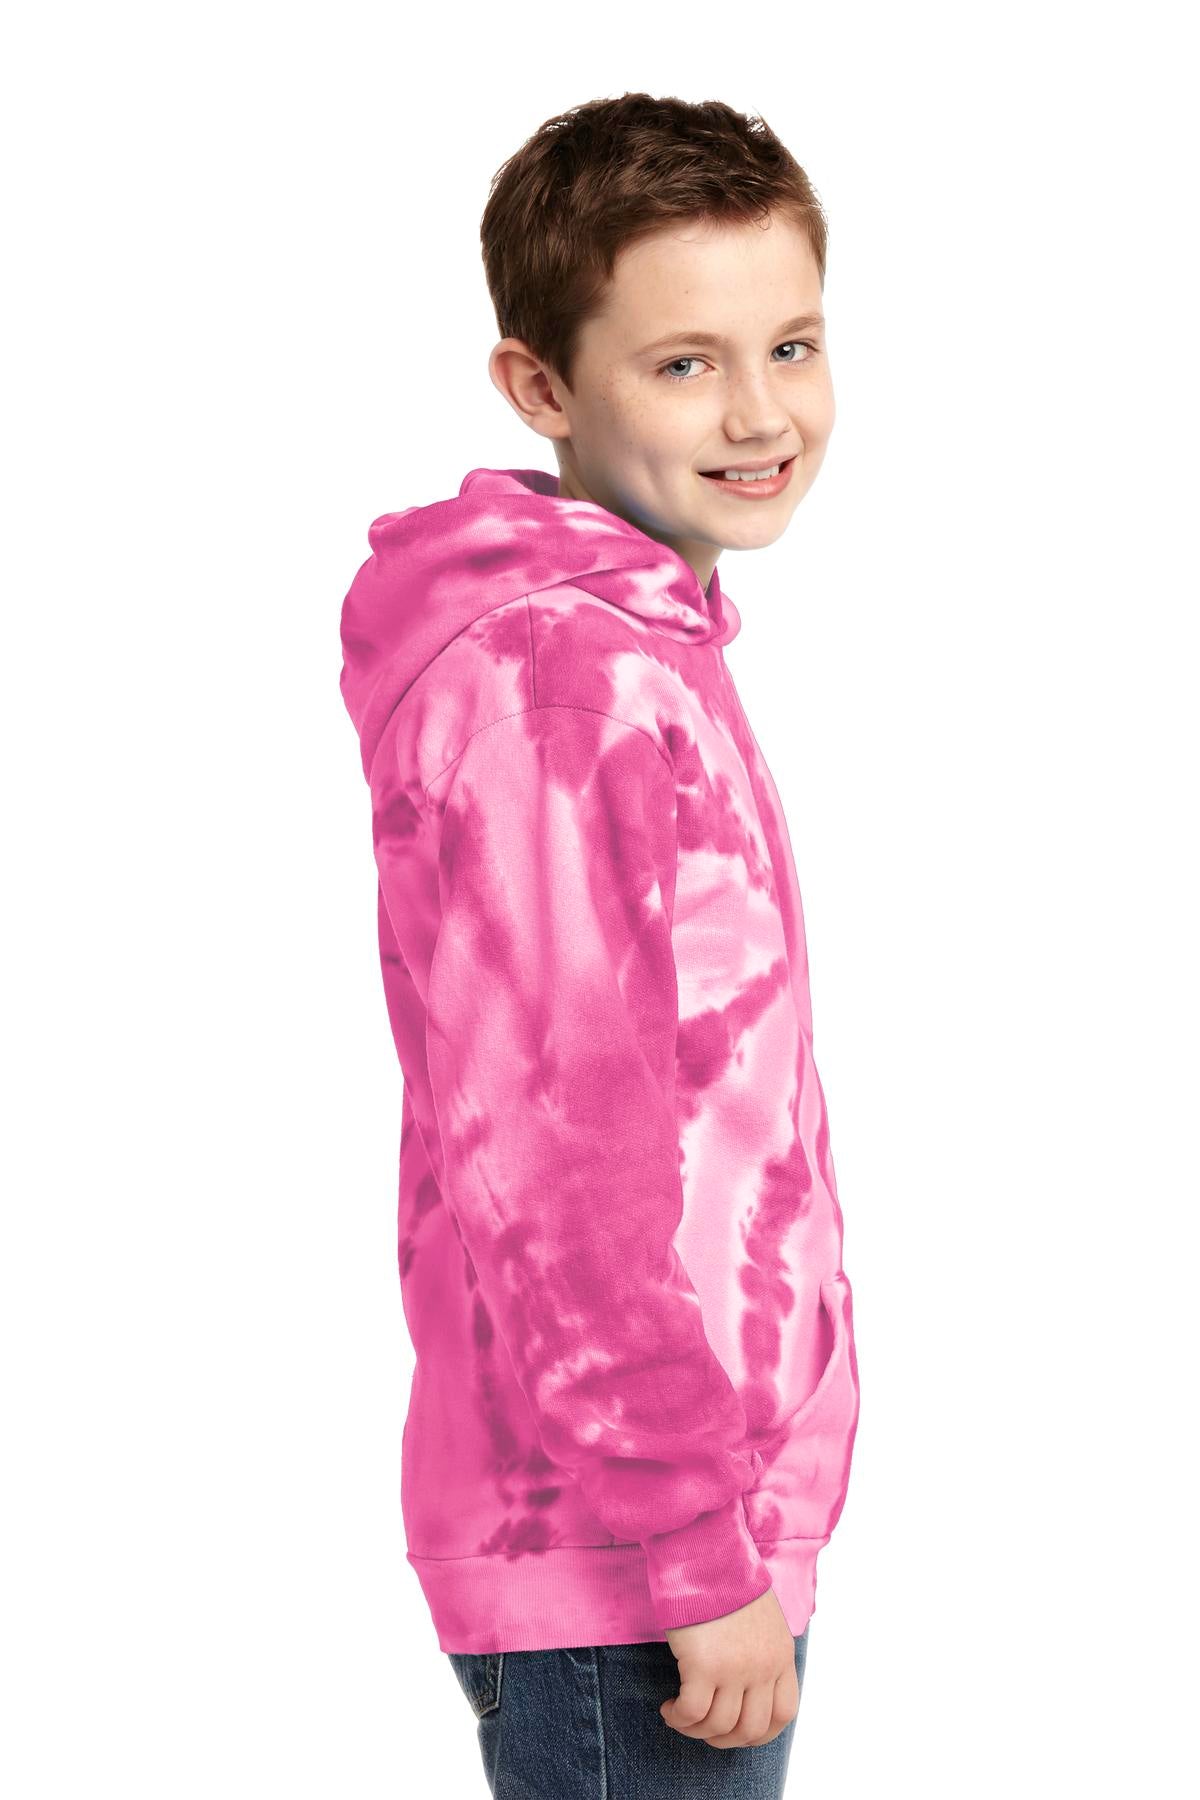 Port & Company Youth Tie-Dye Pullover Hooded Sweatshirt. PC146Y - Pink